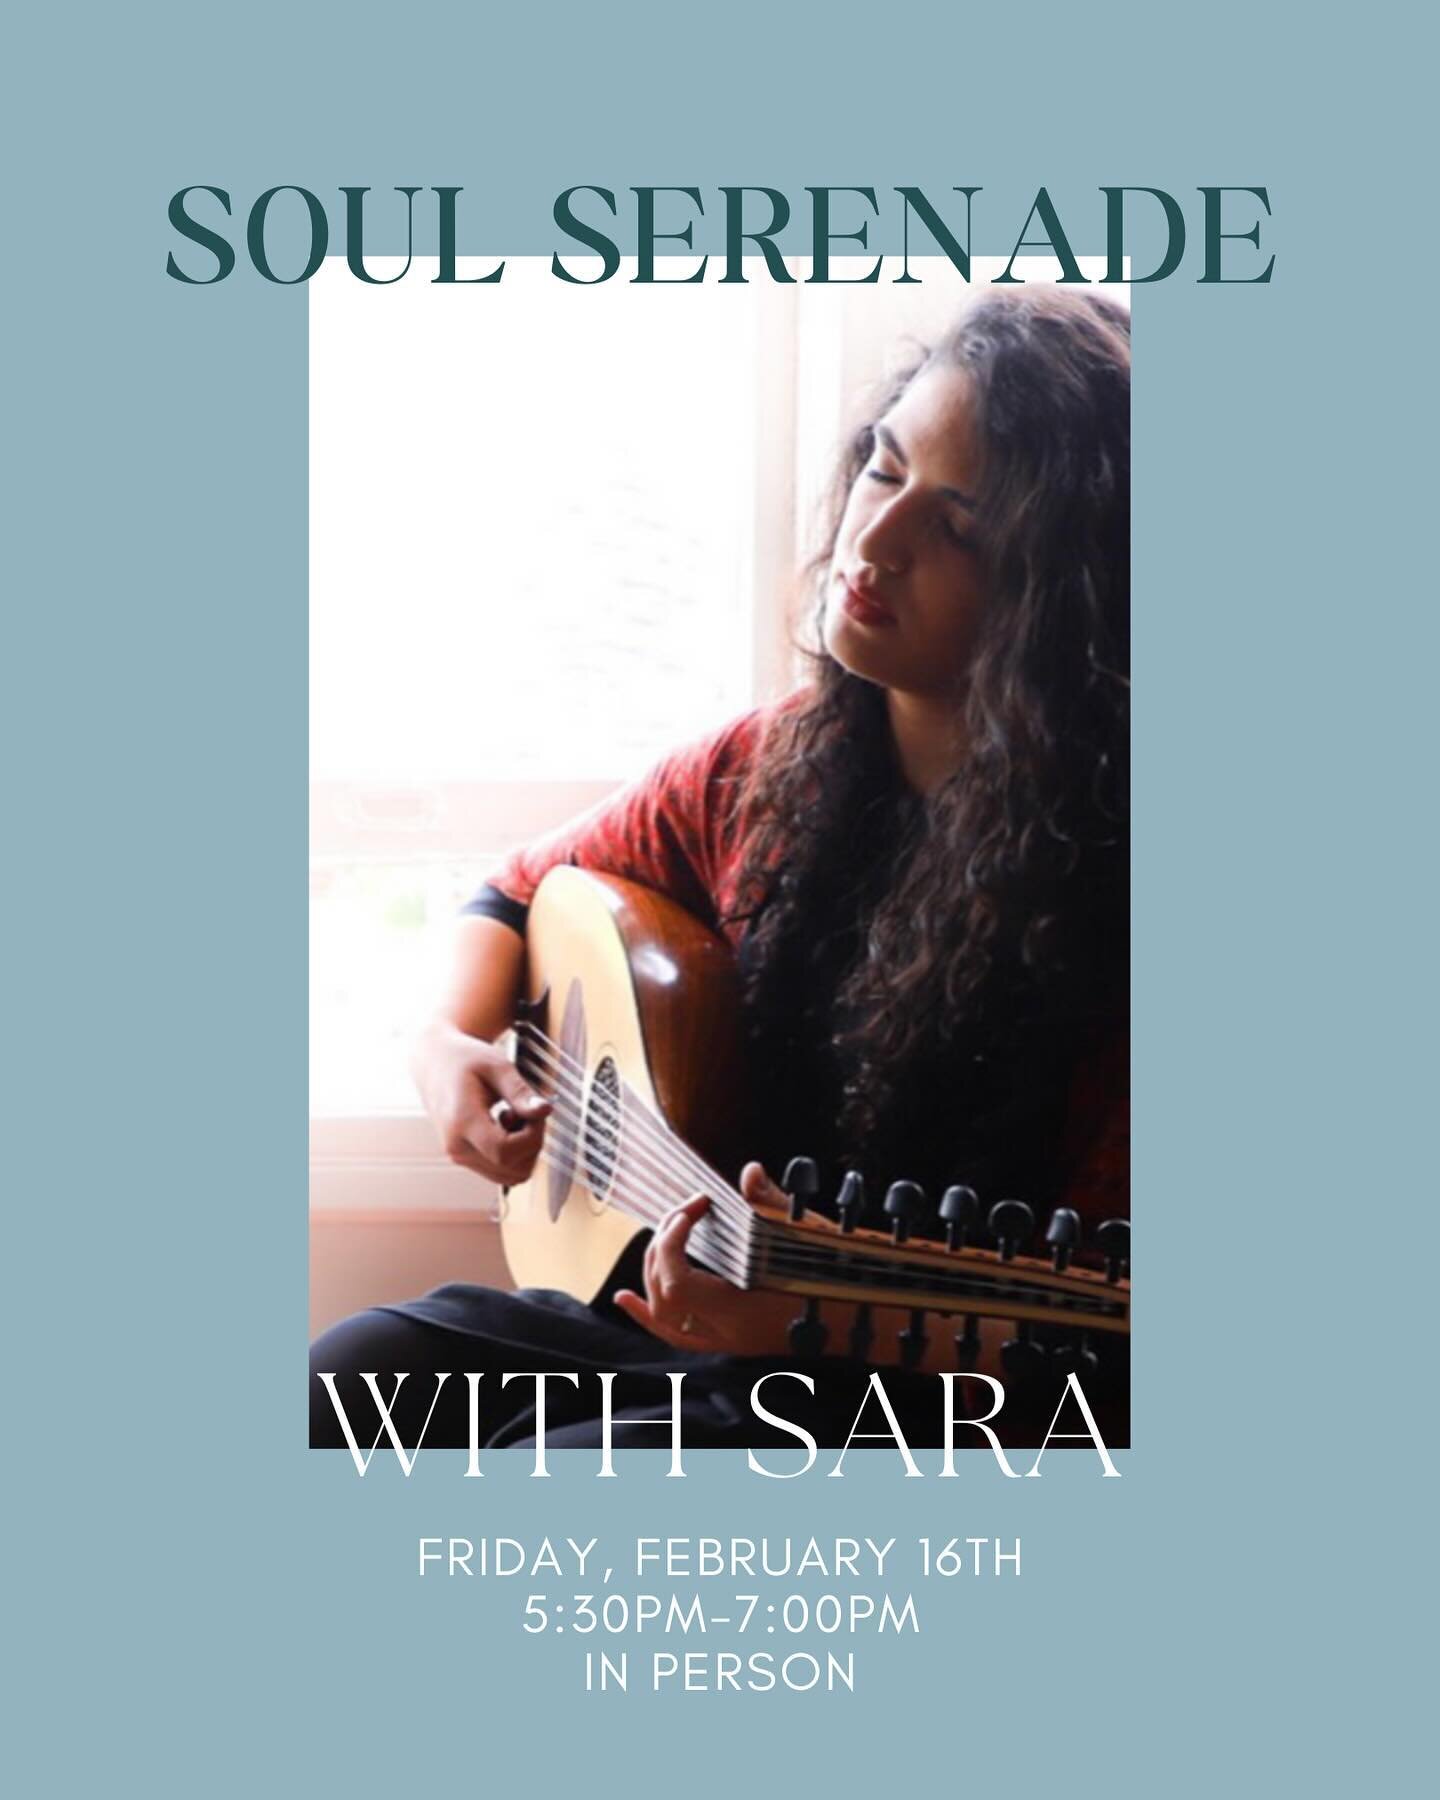 Join Sara on Friday, February 16th at 5:30PM for Soul Serenade. In this unique class, you will be guided through meditation and a restorative practice, followed by a Persian classical music performance. Passion is paramount, but passion refined and s